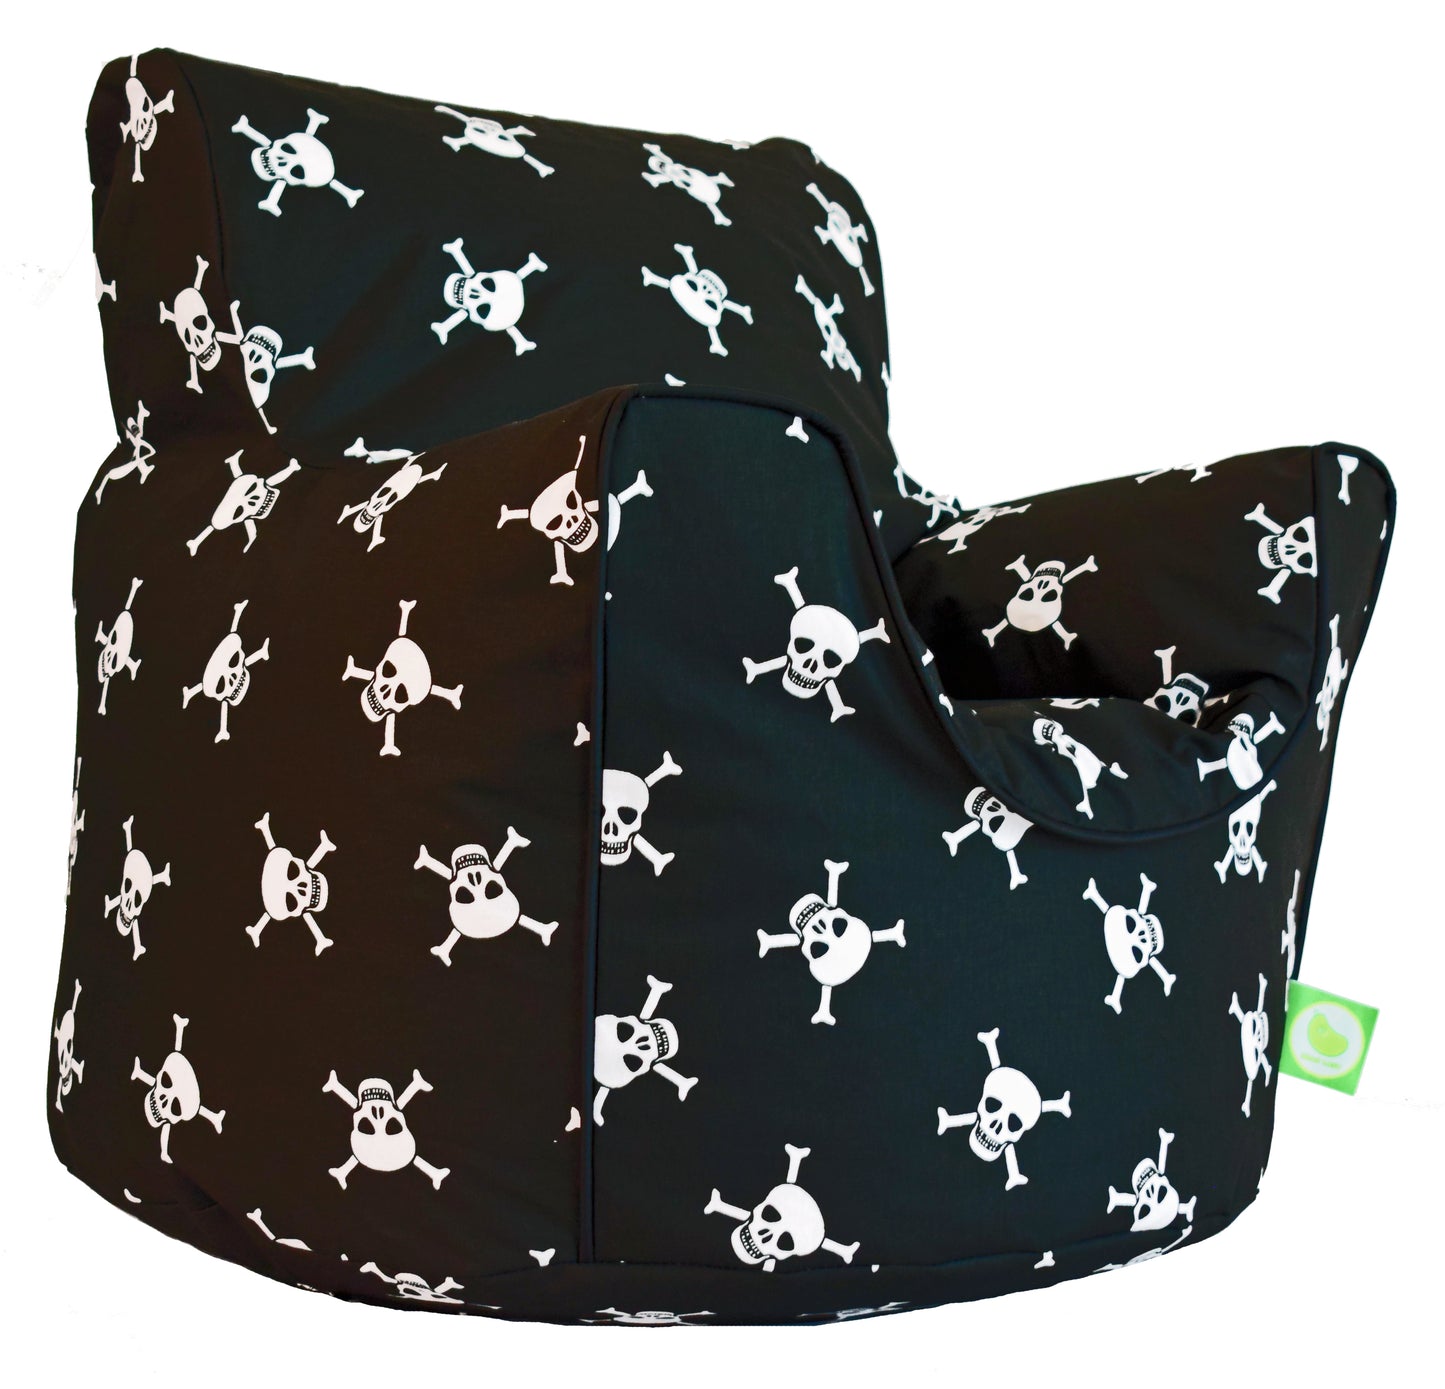 Cotton Black Pirate Skull and Cross Bones Bean Bag Arm Chair with Beans Child / Teen size